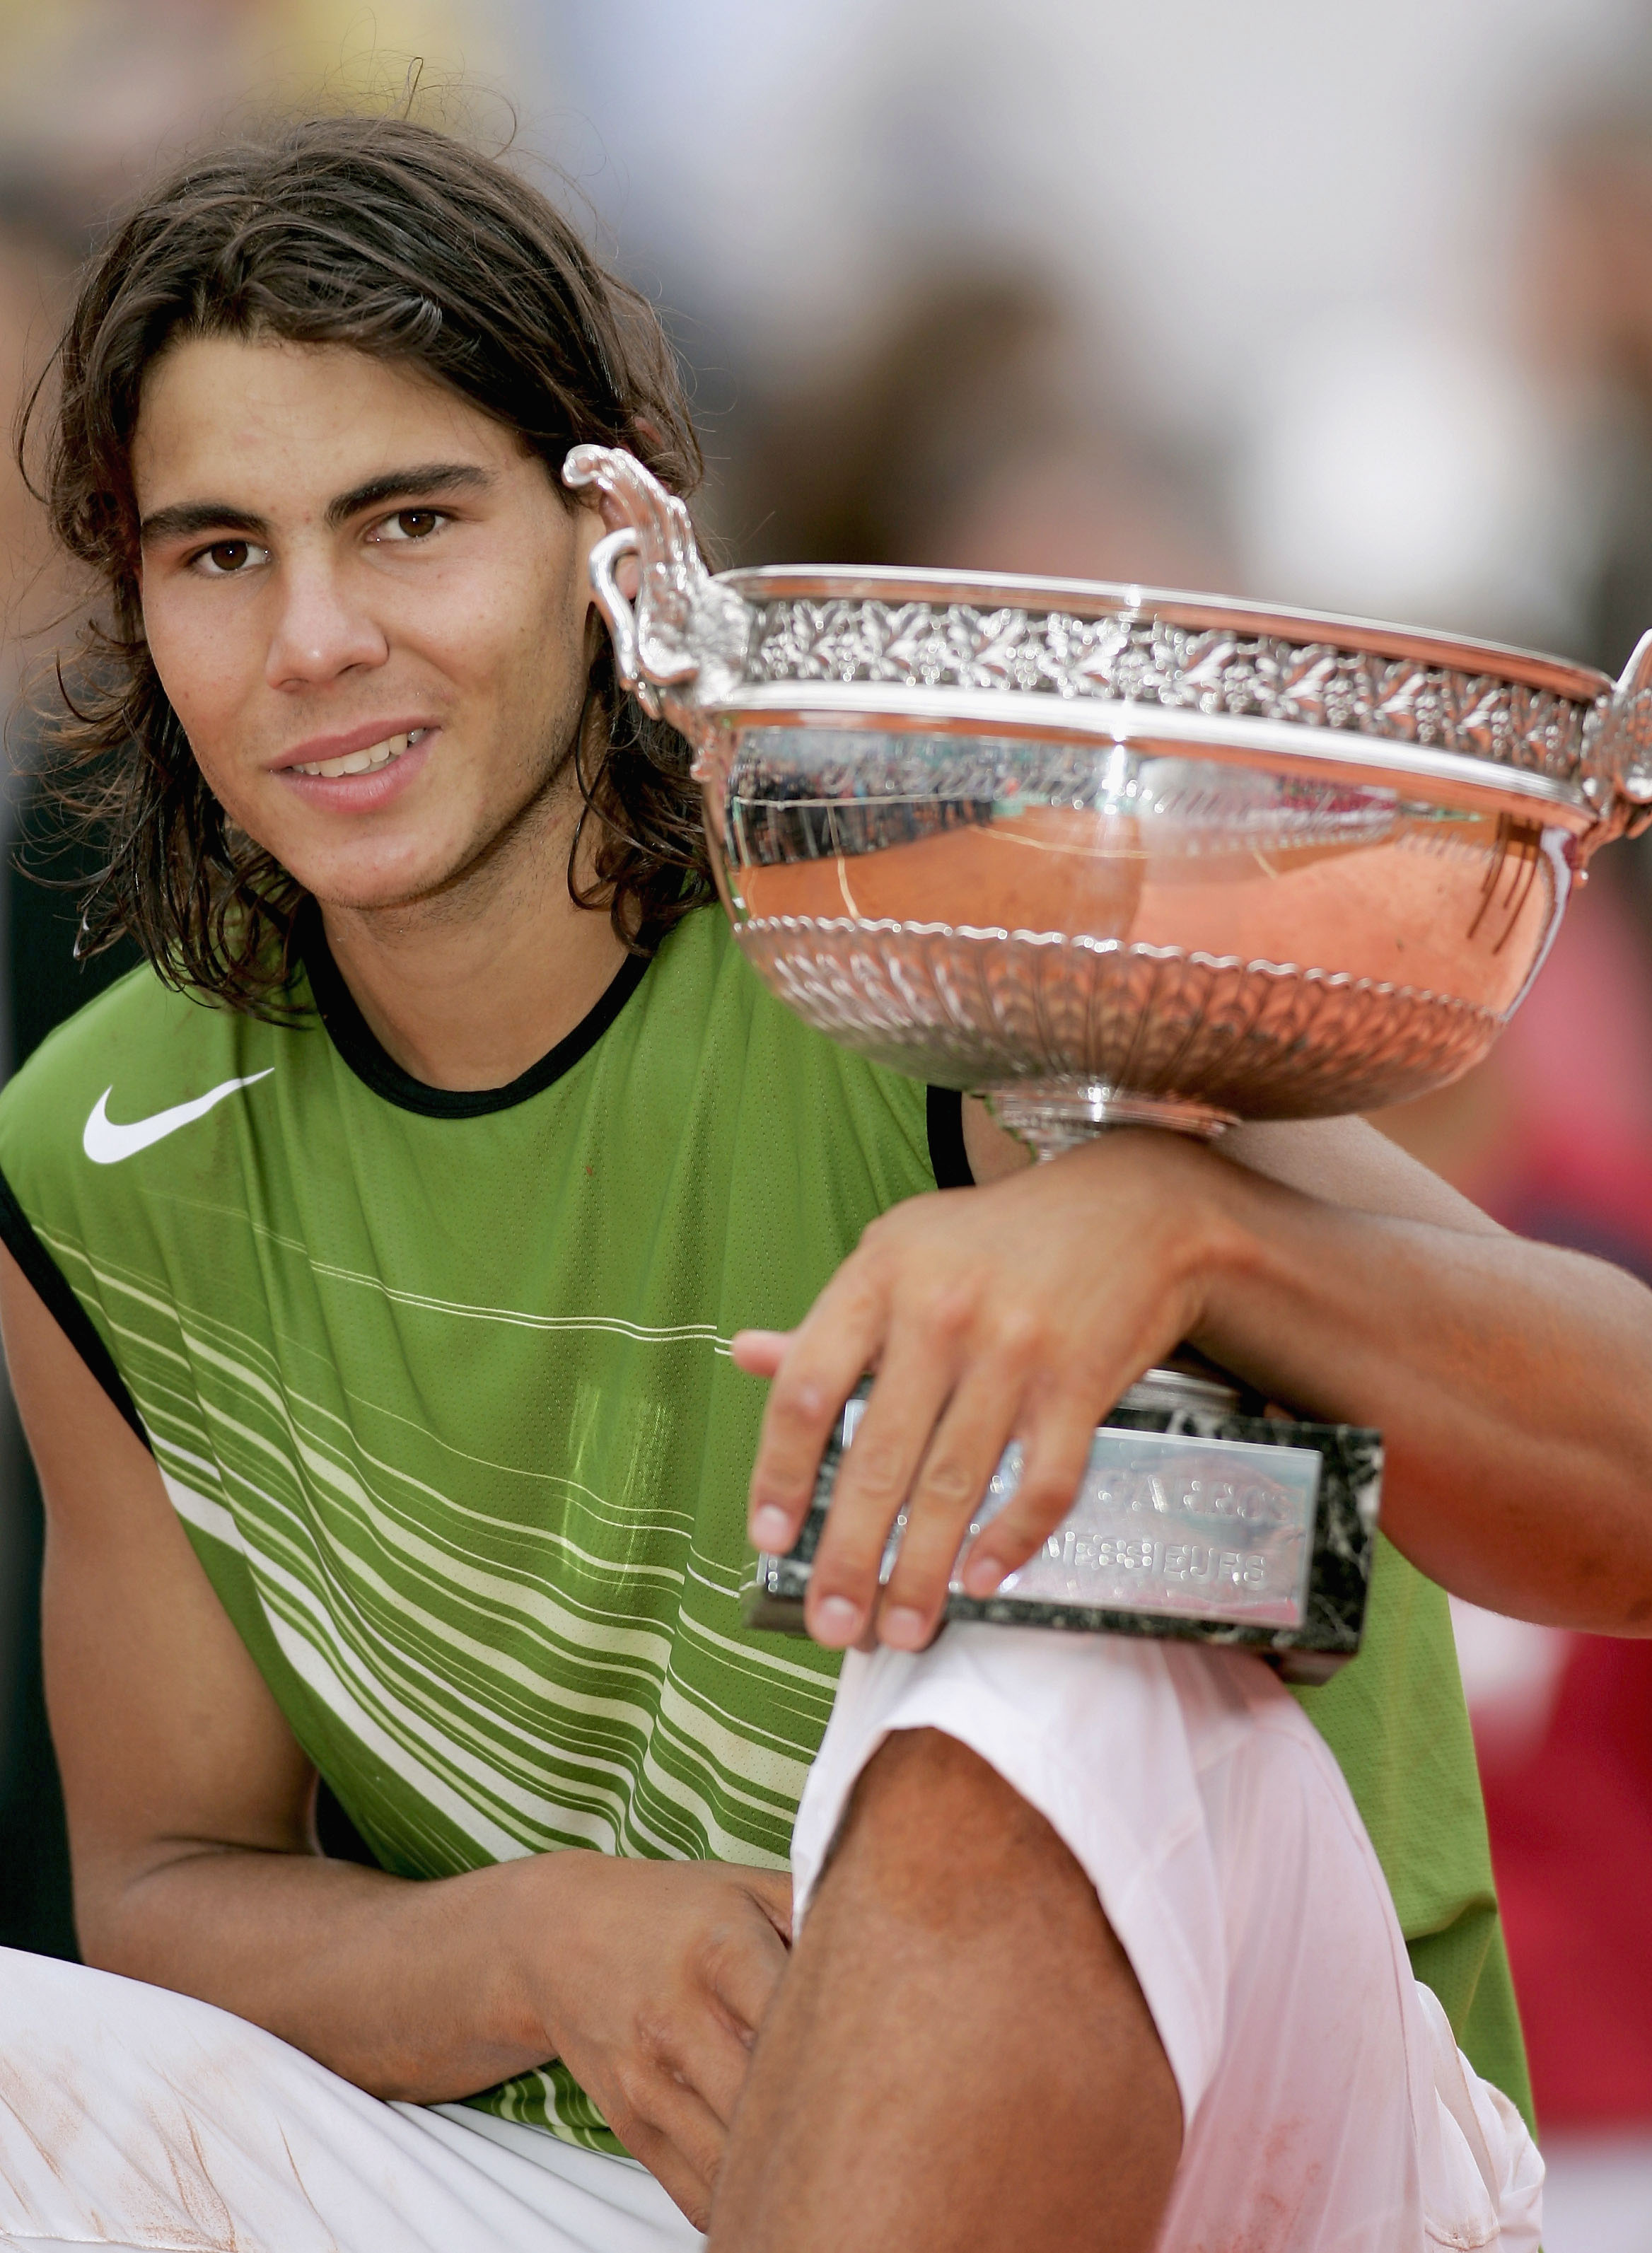 Tennis Rankings: The Top 12 Moments on the Men's Side From 2000-2010